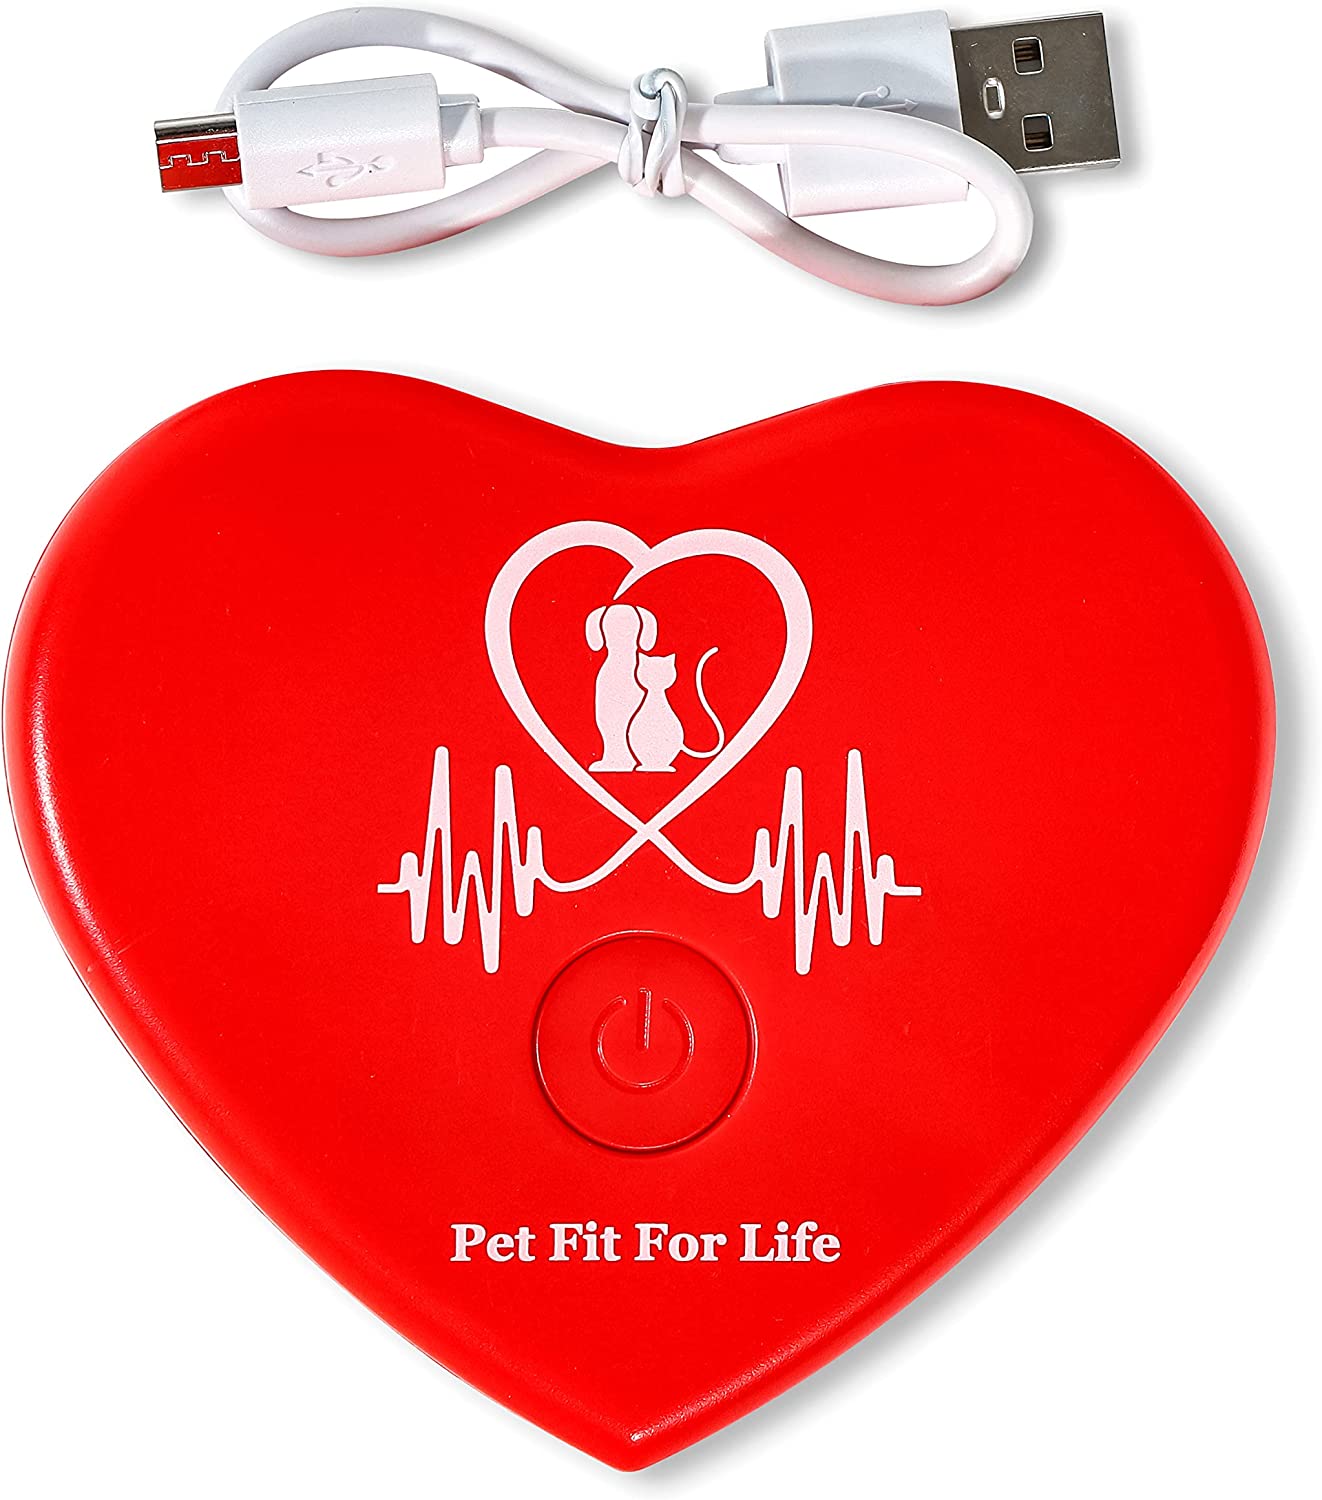 8. Pet Fit for Life Rechargeable Heartbeat Simulator